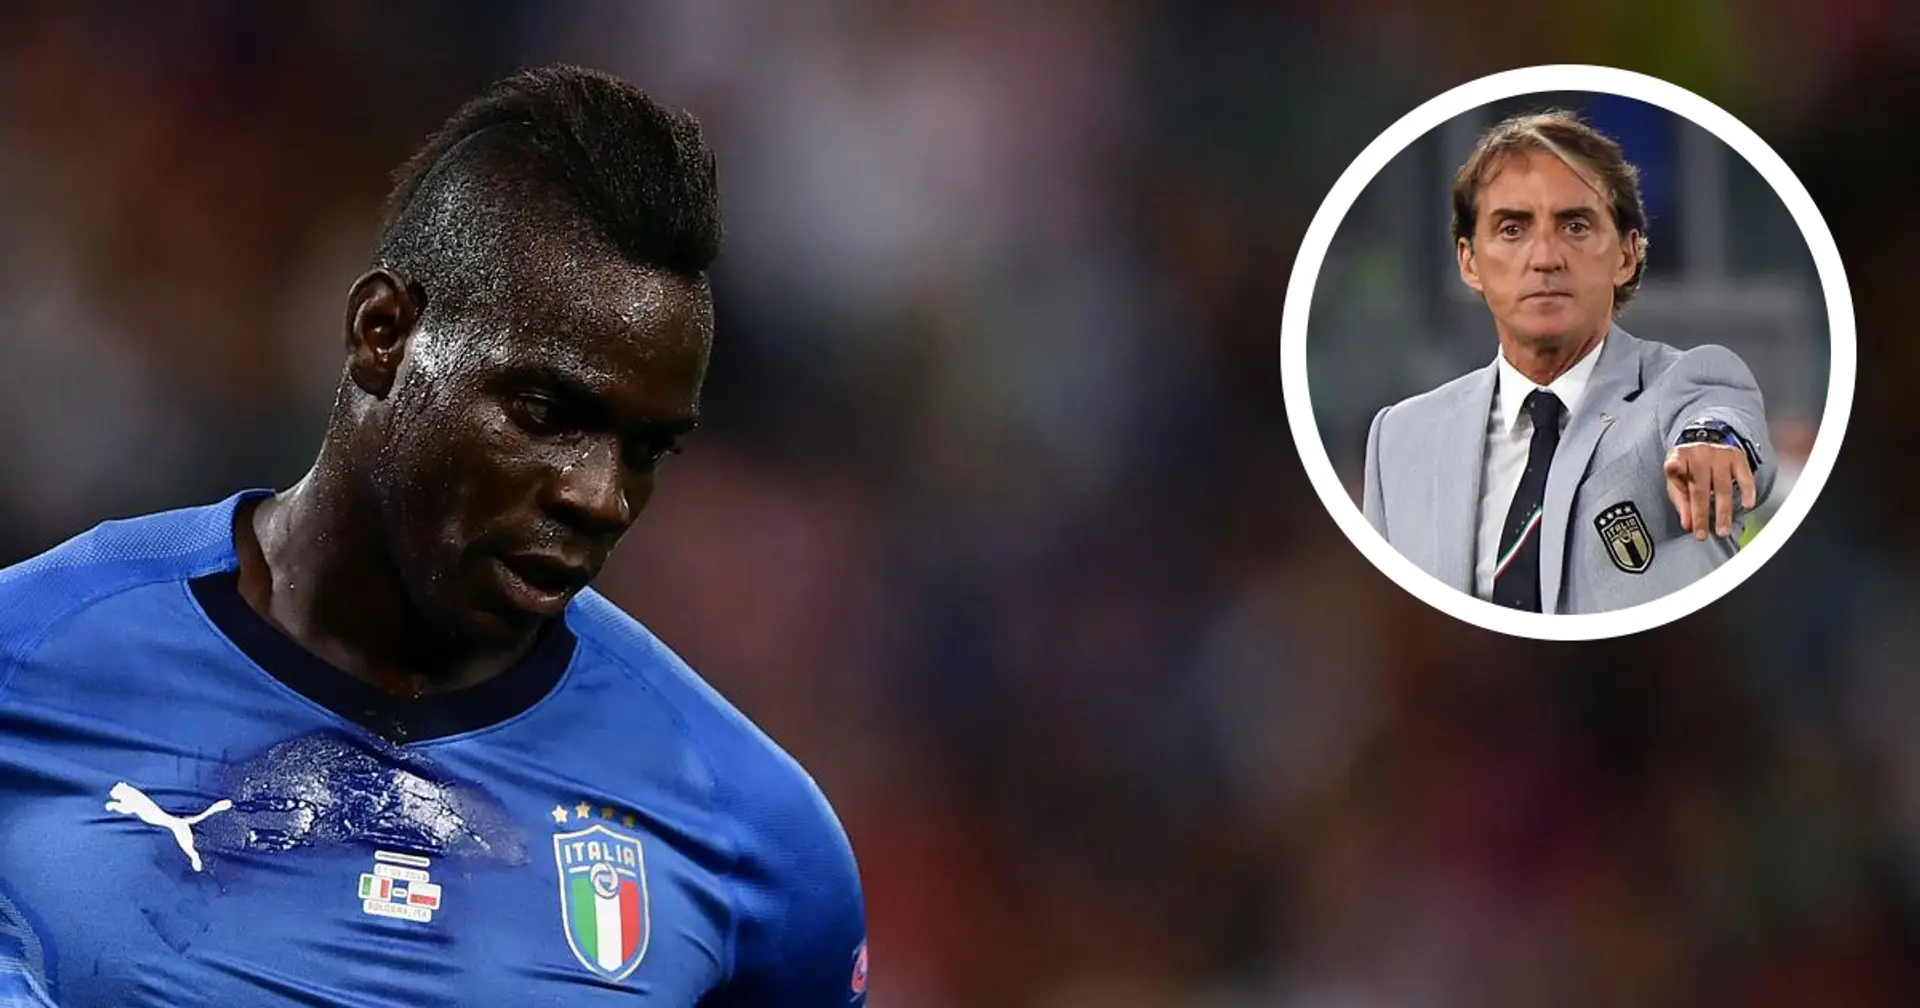 'Why shouldn't he call me?': Mario Balotelli wants Italy return, sends message to Roberto Mancini